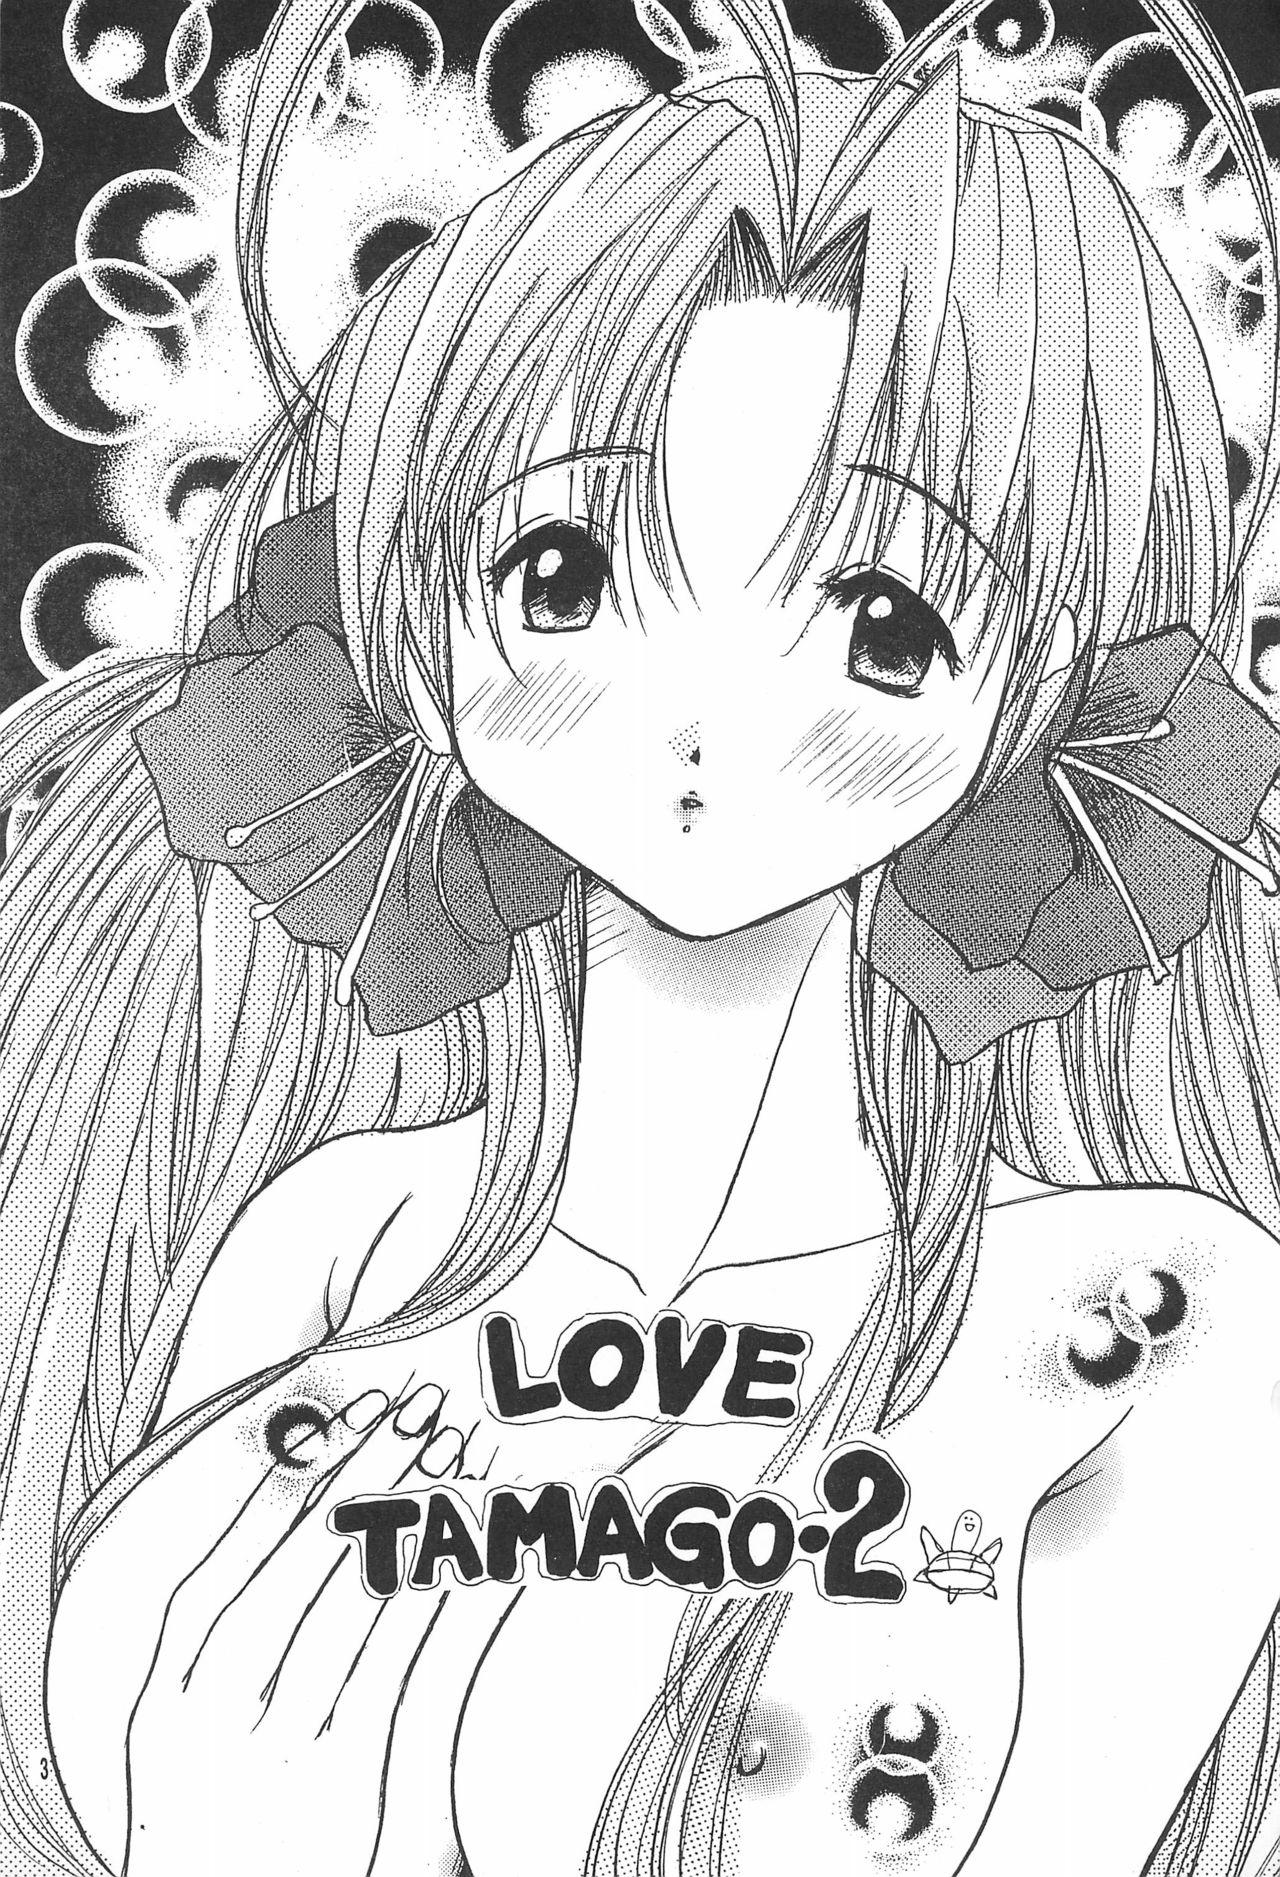 Tied Love Tamago 2 - Love hina Muscle - Page 3